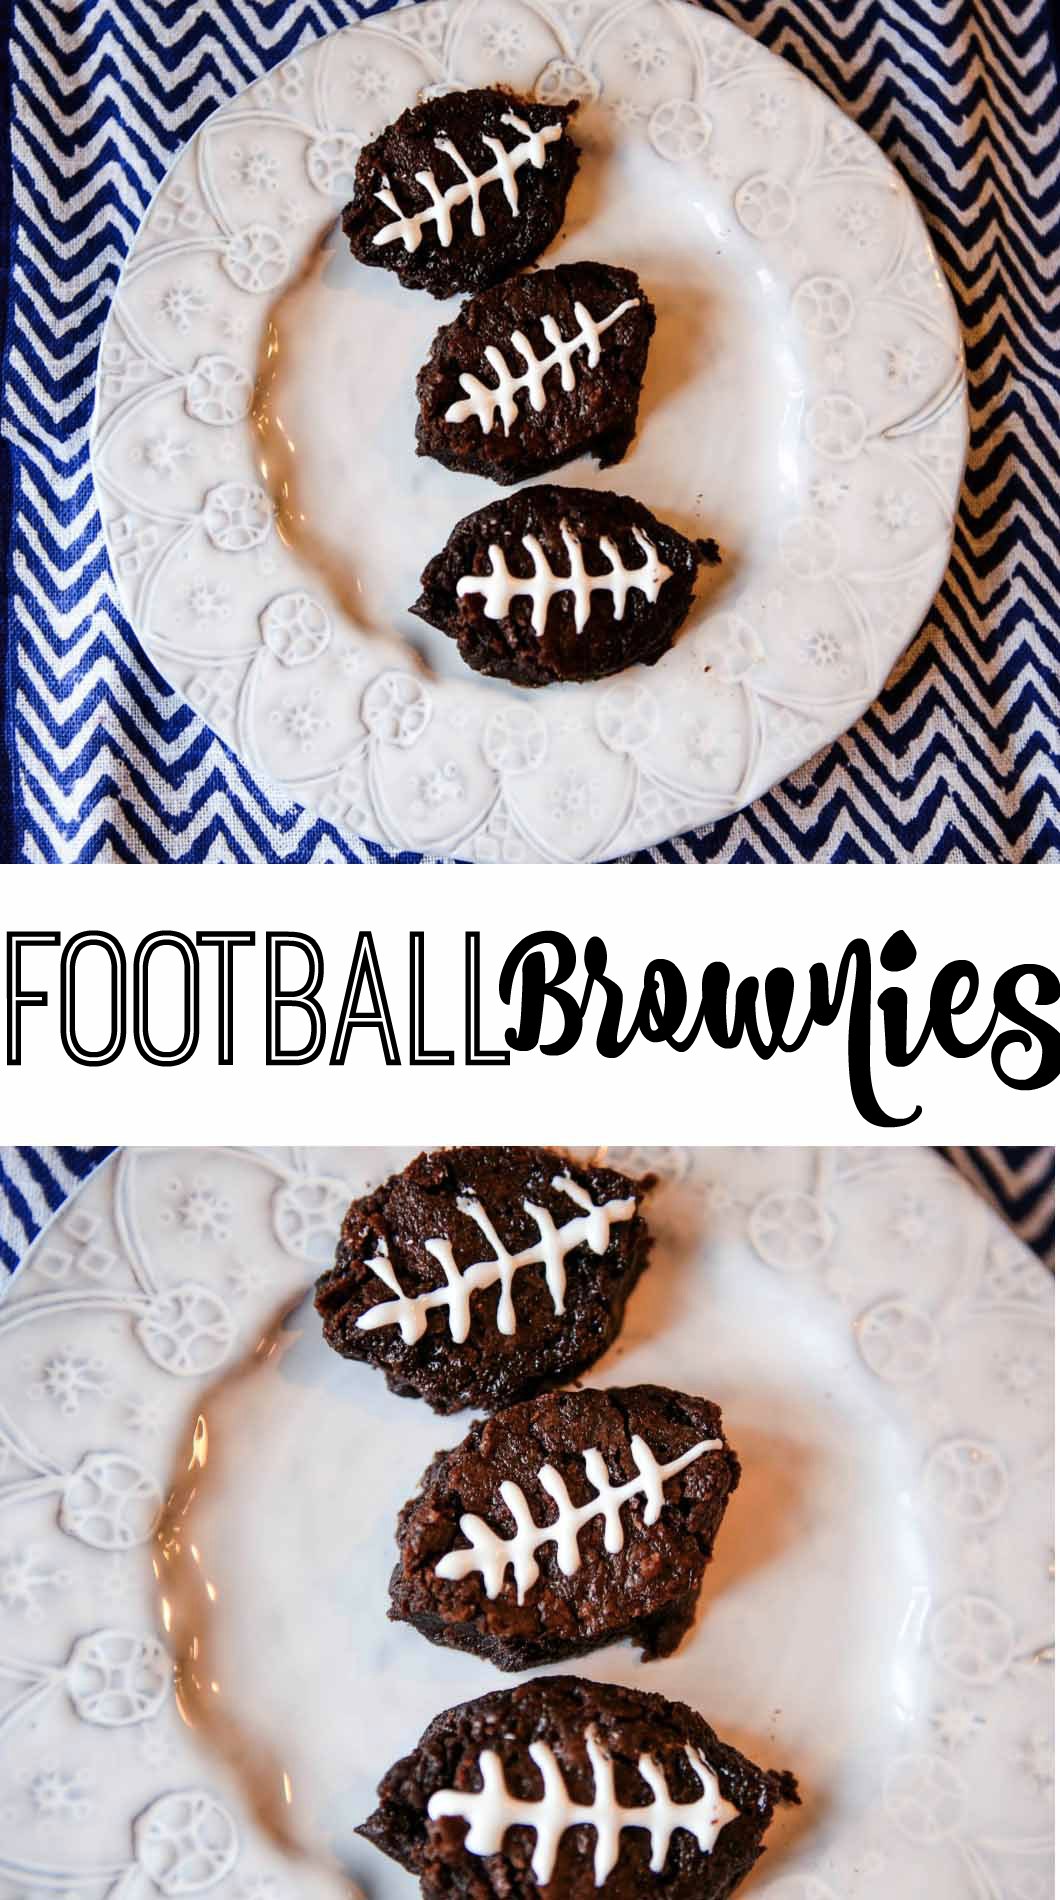 Football Brownies for the Super Bowl with fairlife Ultra-Filtered Milk by Atlanta style blogger Happily Hughes